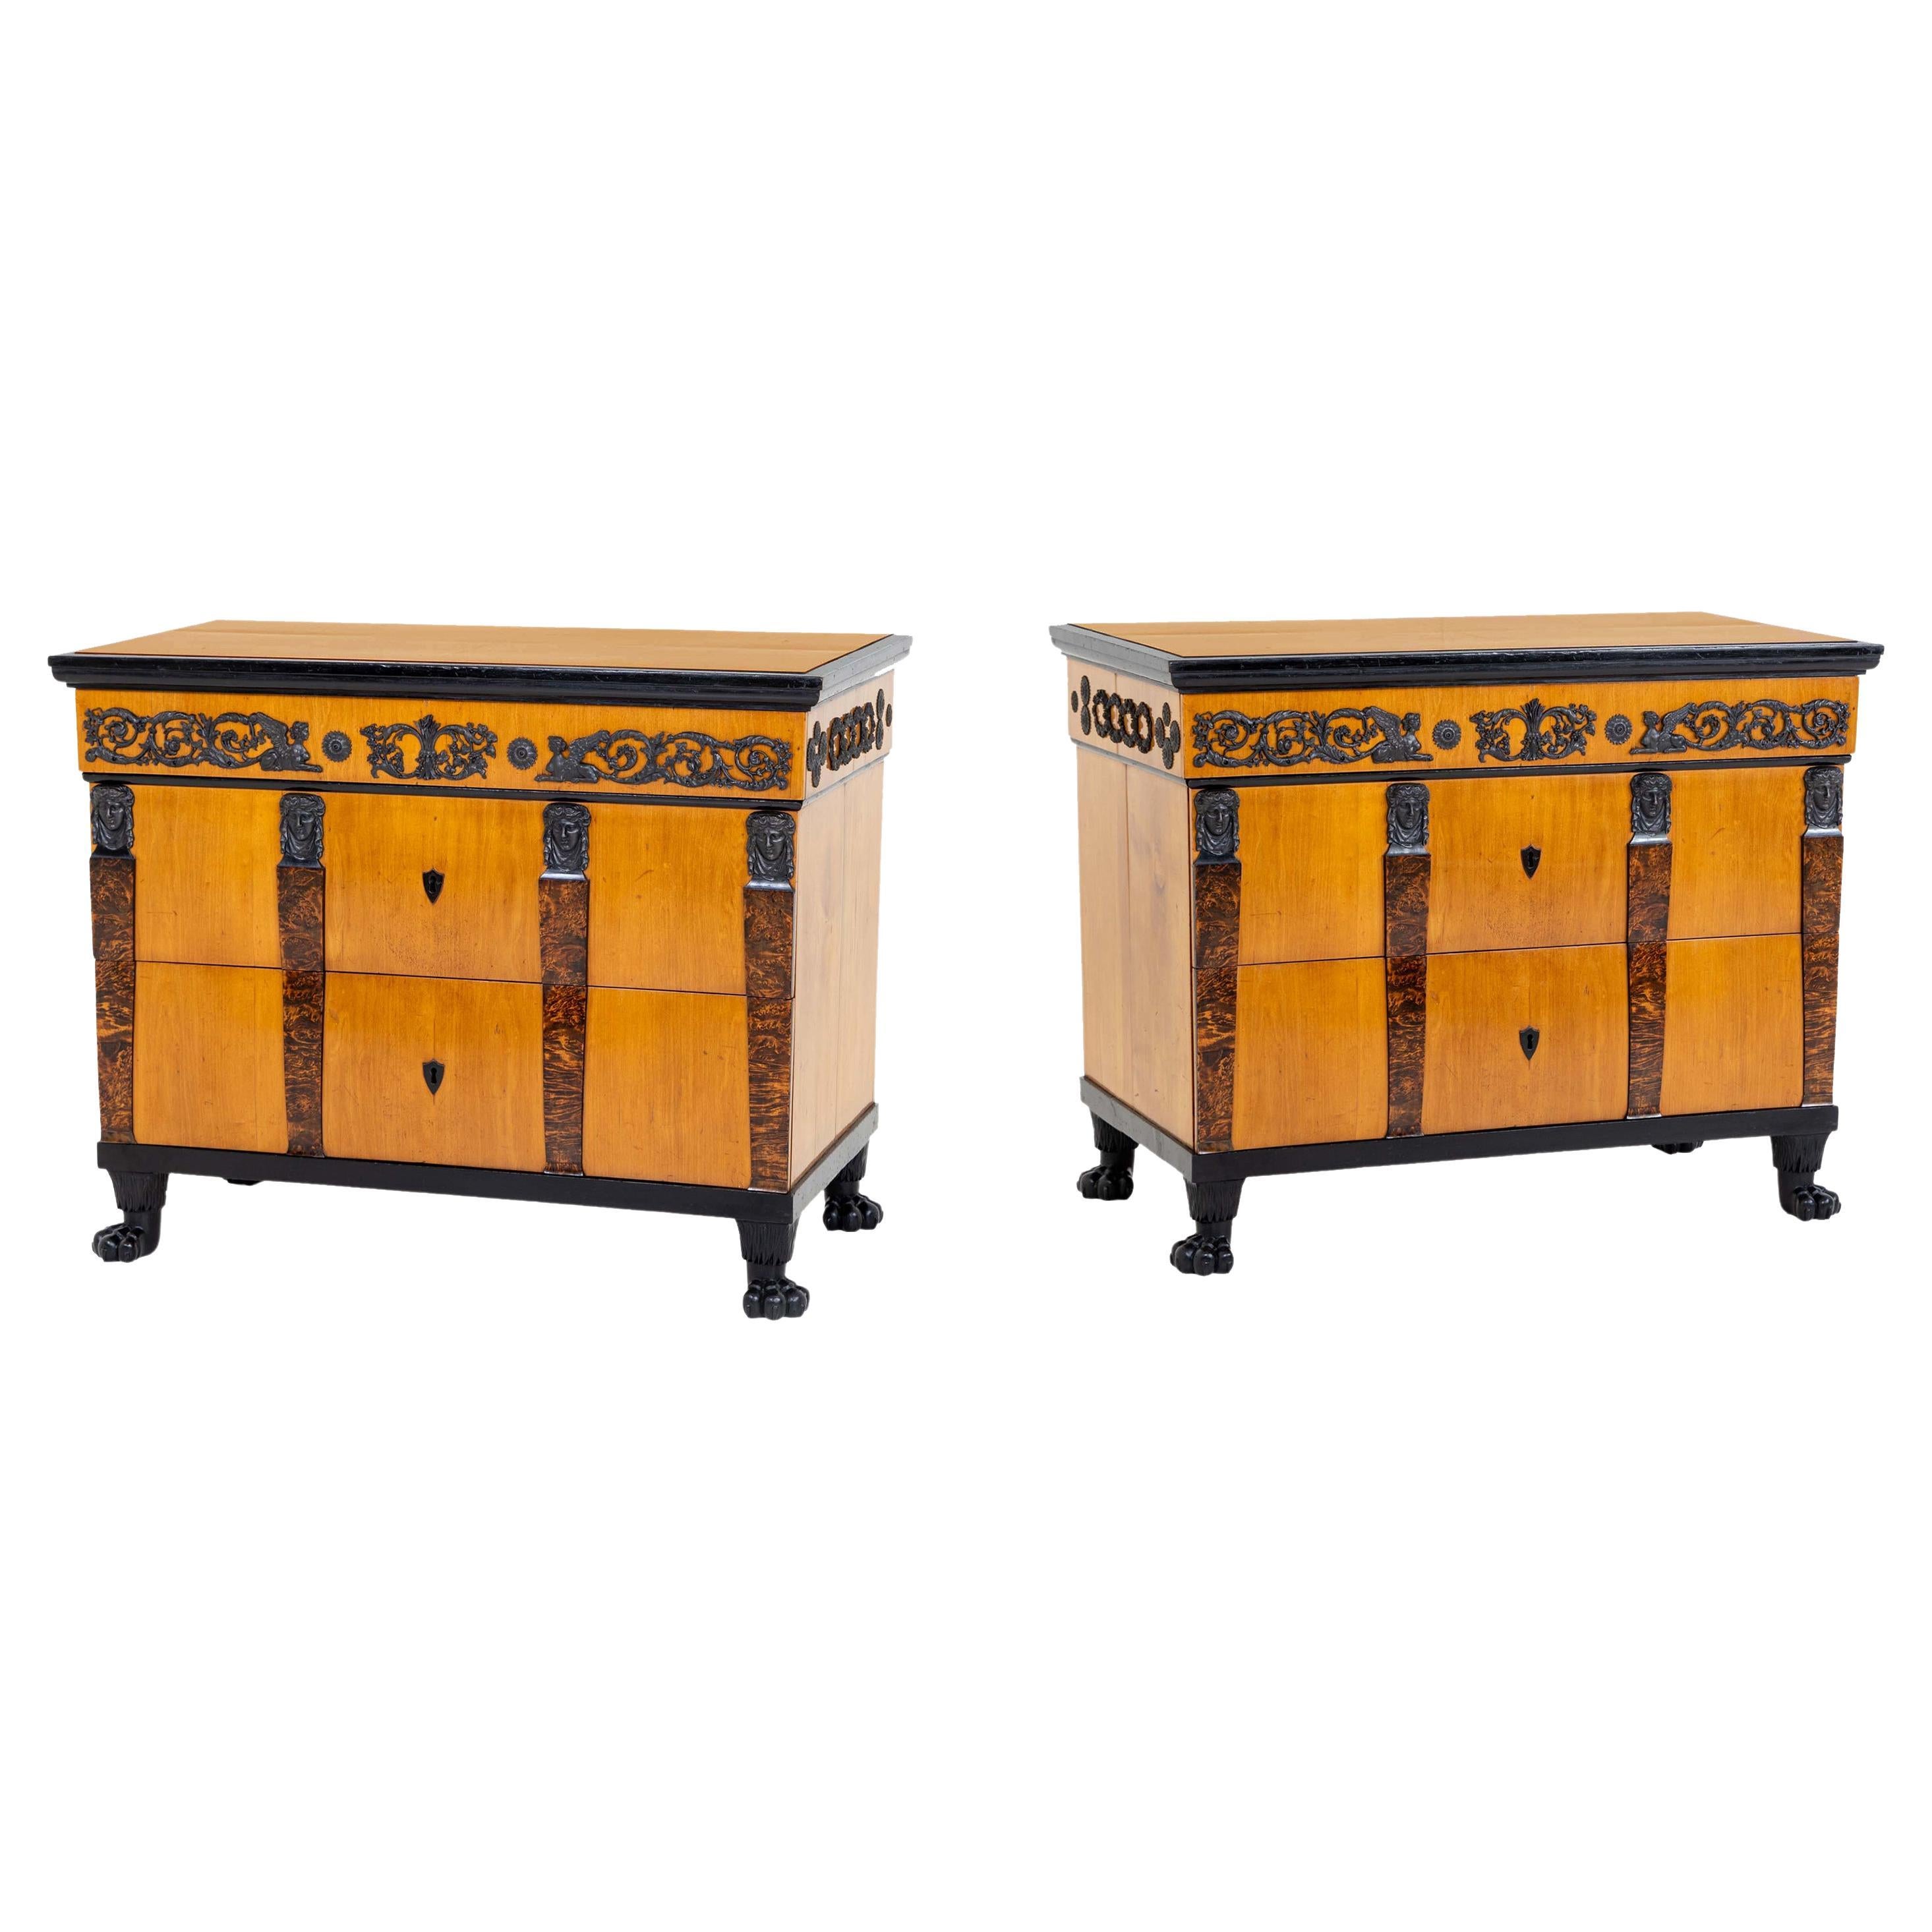 Pair of Important Chests With Berlin Cast Iron Details